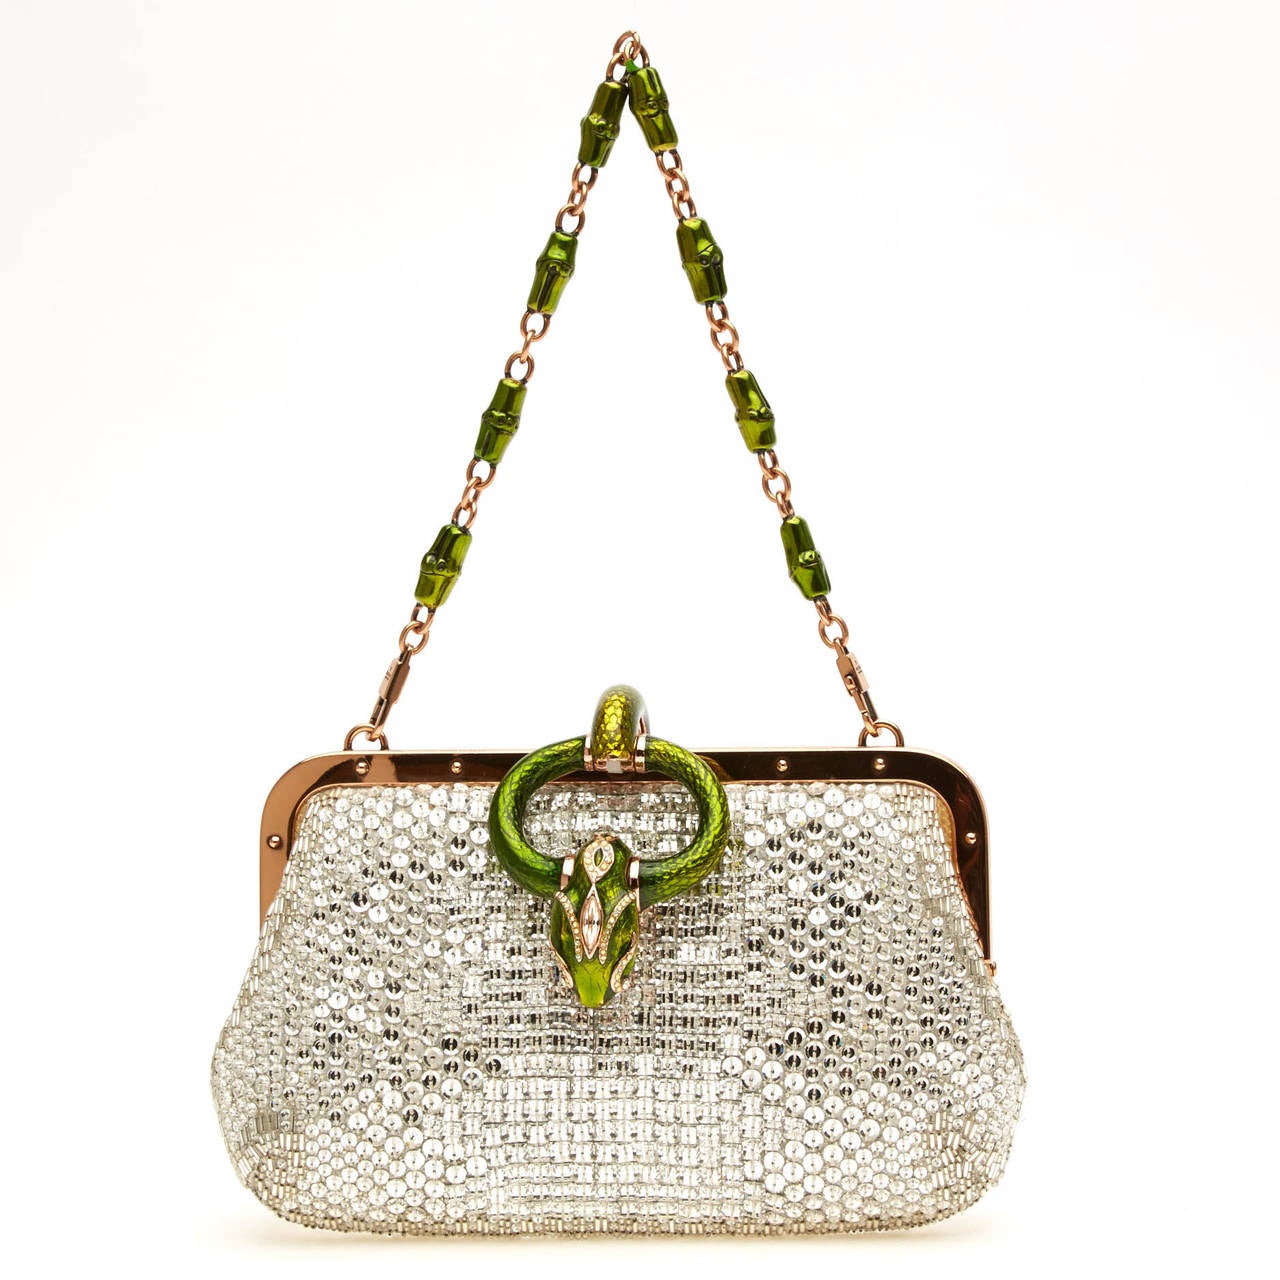 This stunning Gucci Crystal Evening Snake Head Clutch is decked with vibrant silver sequins. The rose gold hardware trimming is accented with a green metallic snake head encrusted with crystals securing the frontal flap and a matching beaded handle.